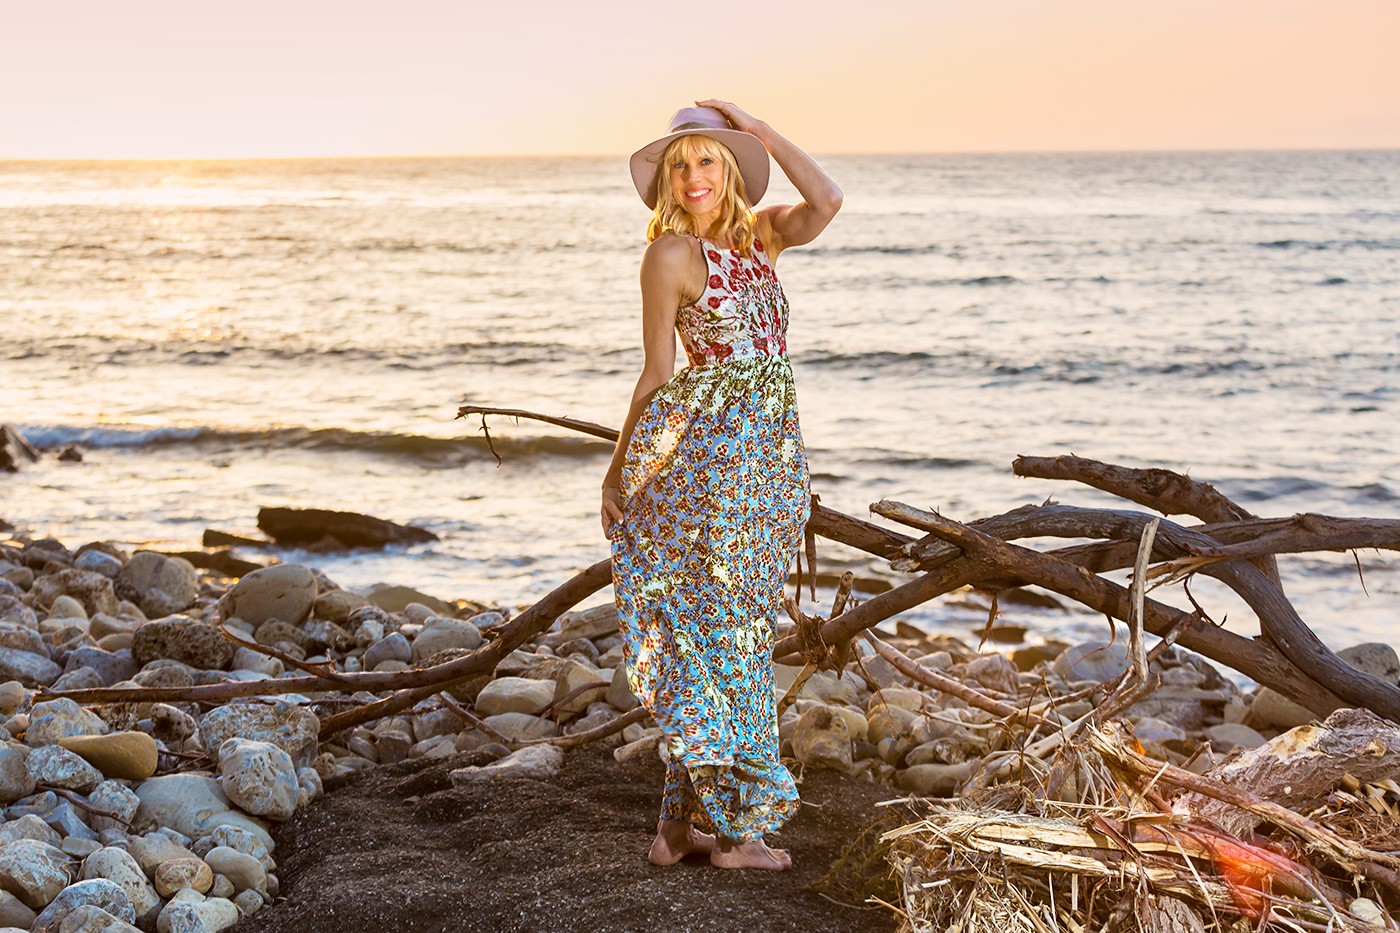 Anthropologie dress and Michael Stars hat in a turning pose on the beach